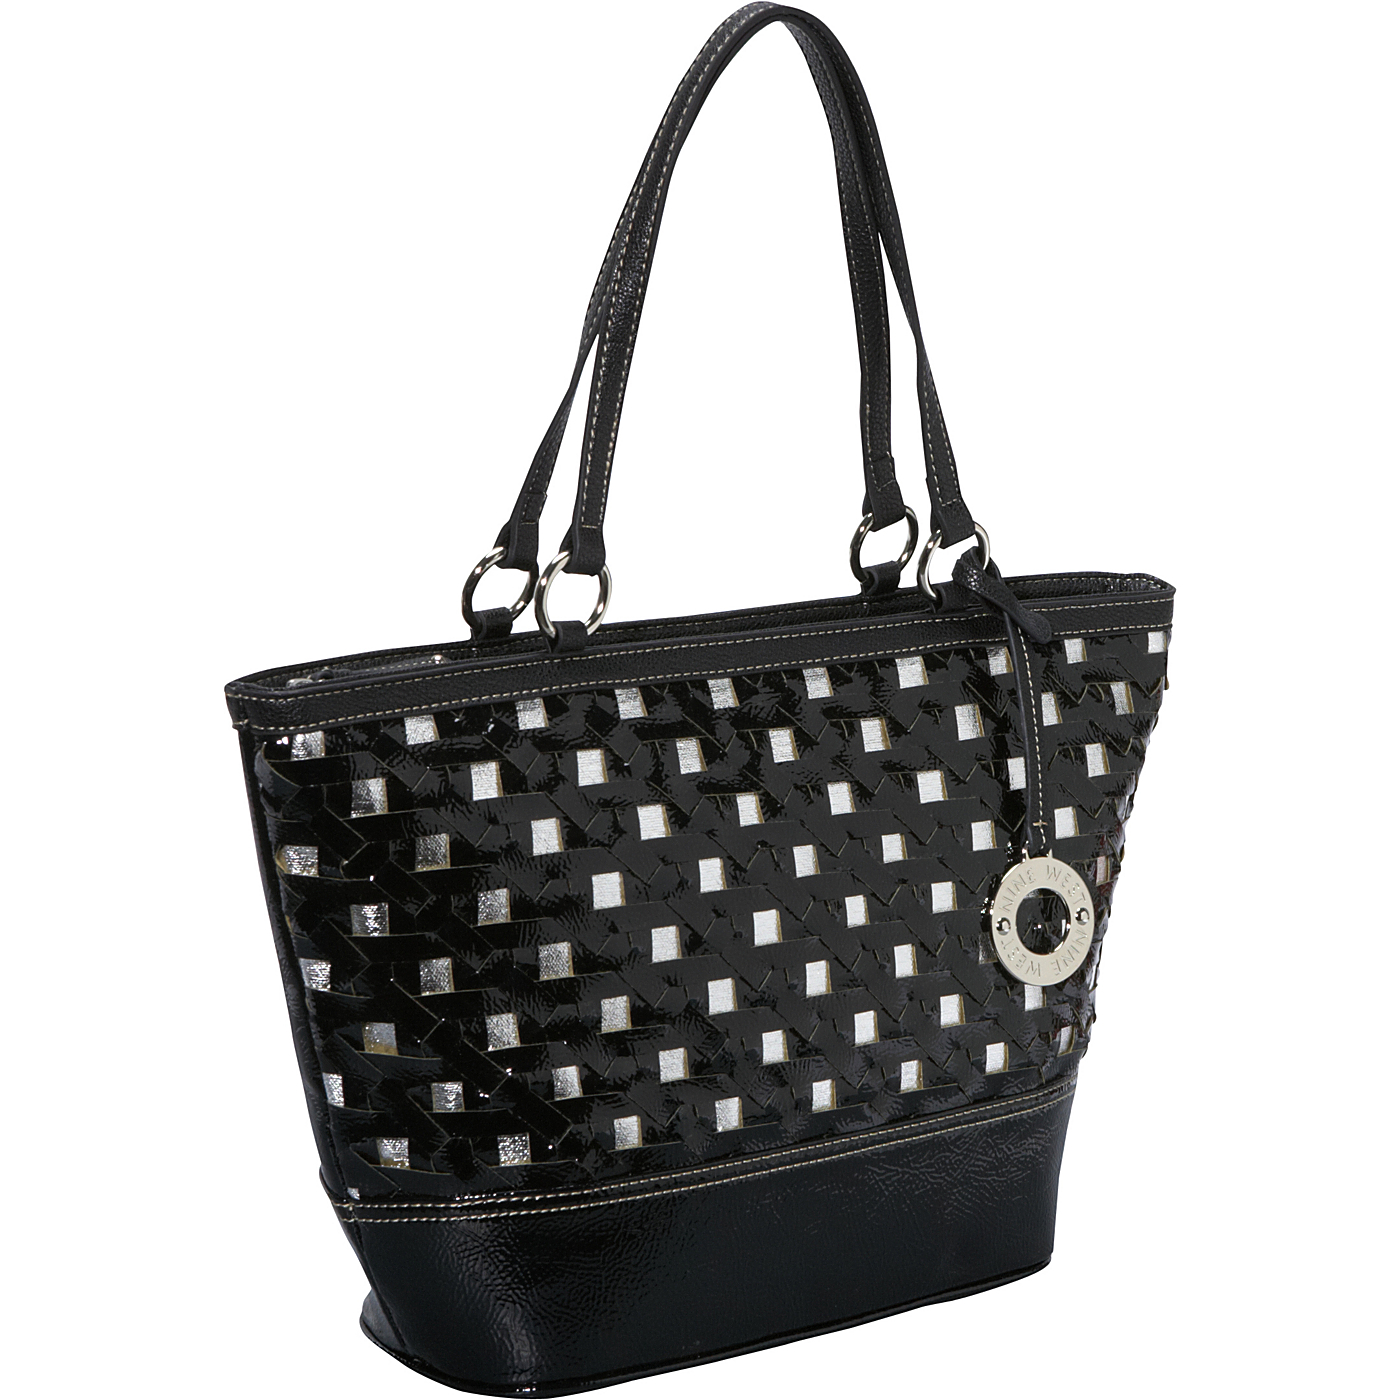 Nine West Handbags If The Tote Fits Md Tote